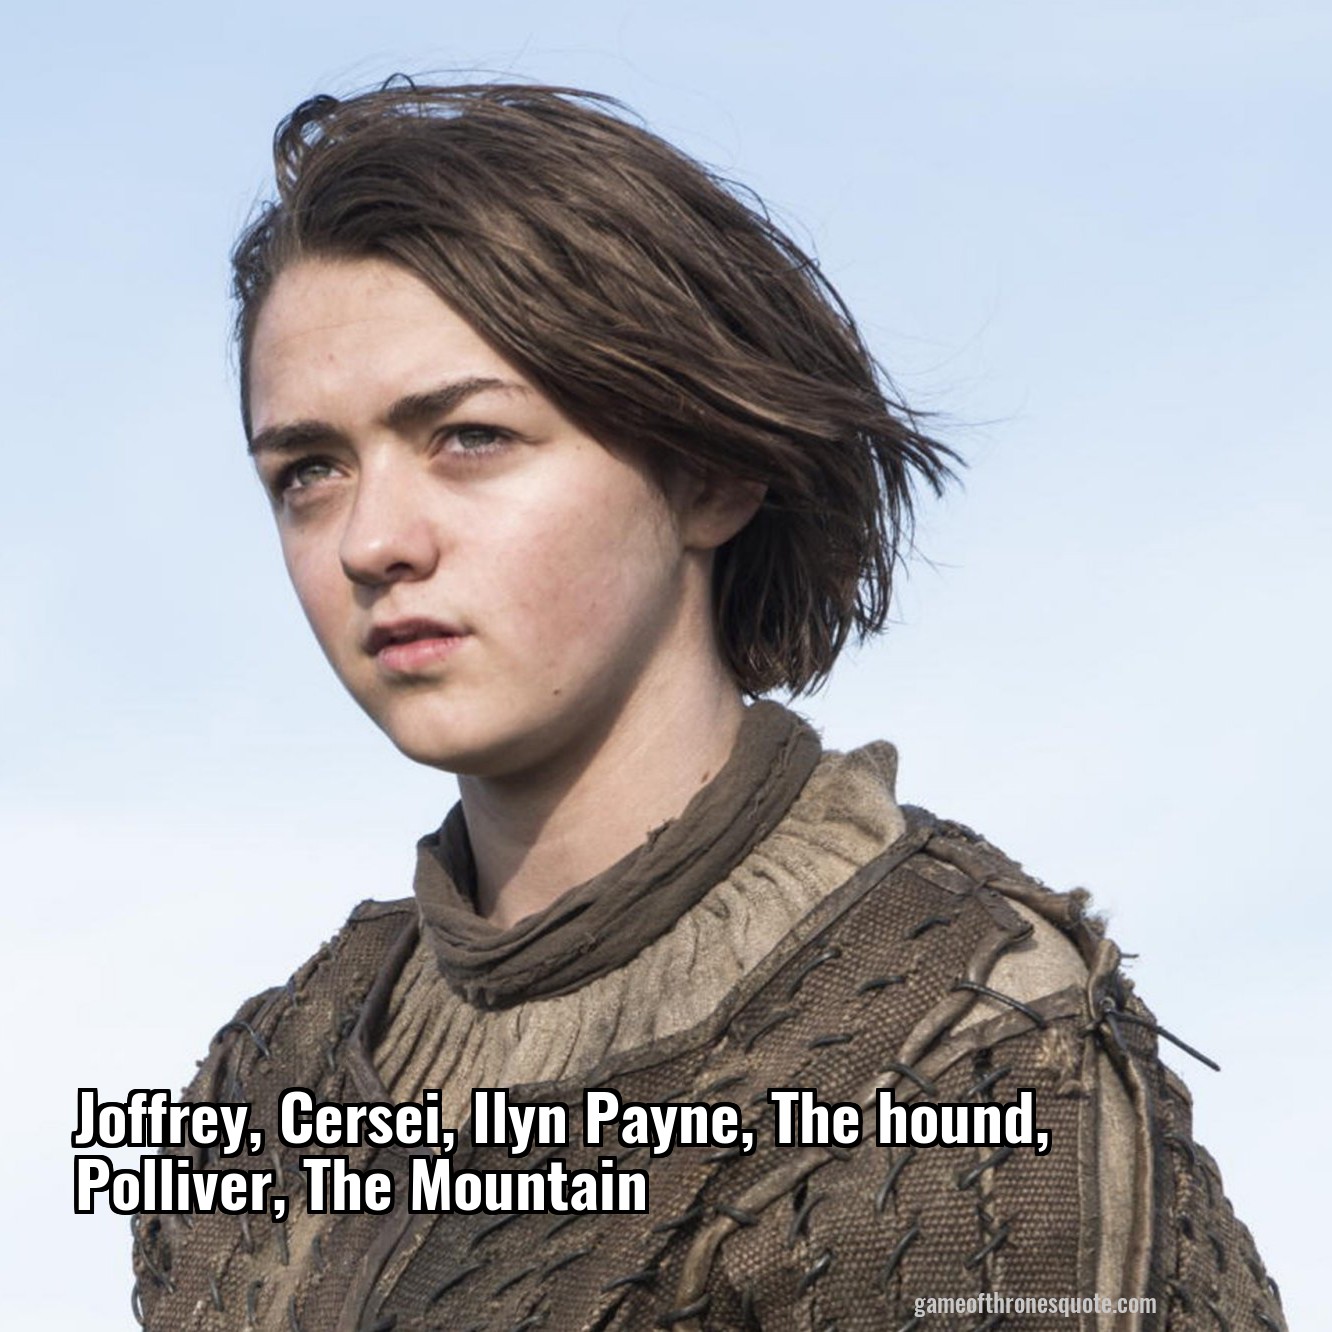 Arya Stark Joffrey Cersei Ilyn Payne The Hound Polliver The Game Of Thrones Quote